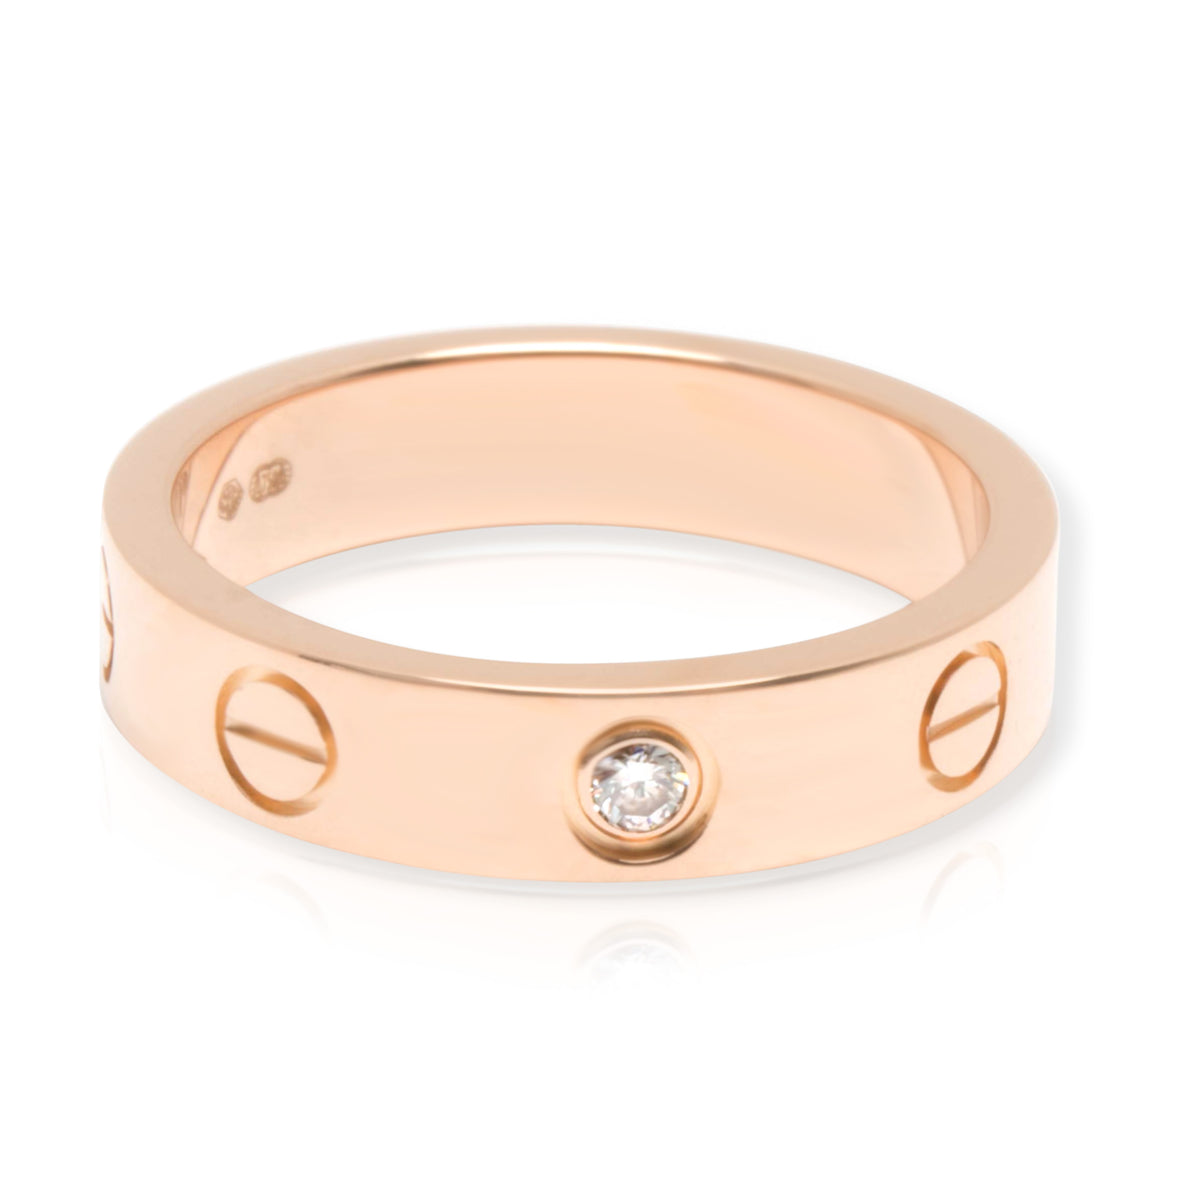 Cartier Love Diamond Wedding Band in 18KT Rose Gold 0.02ct (Size 48)